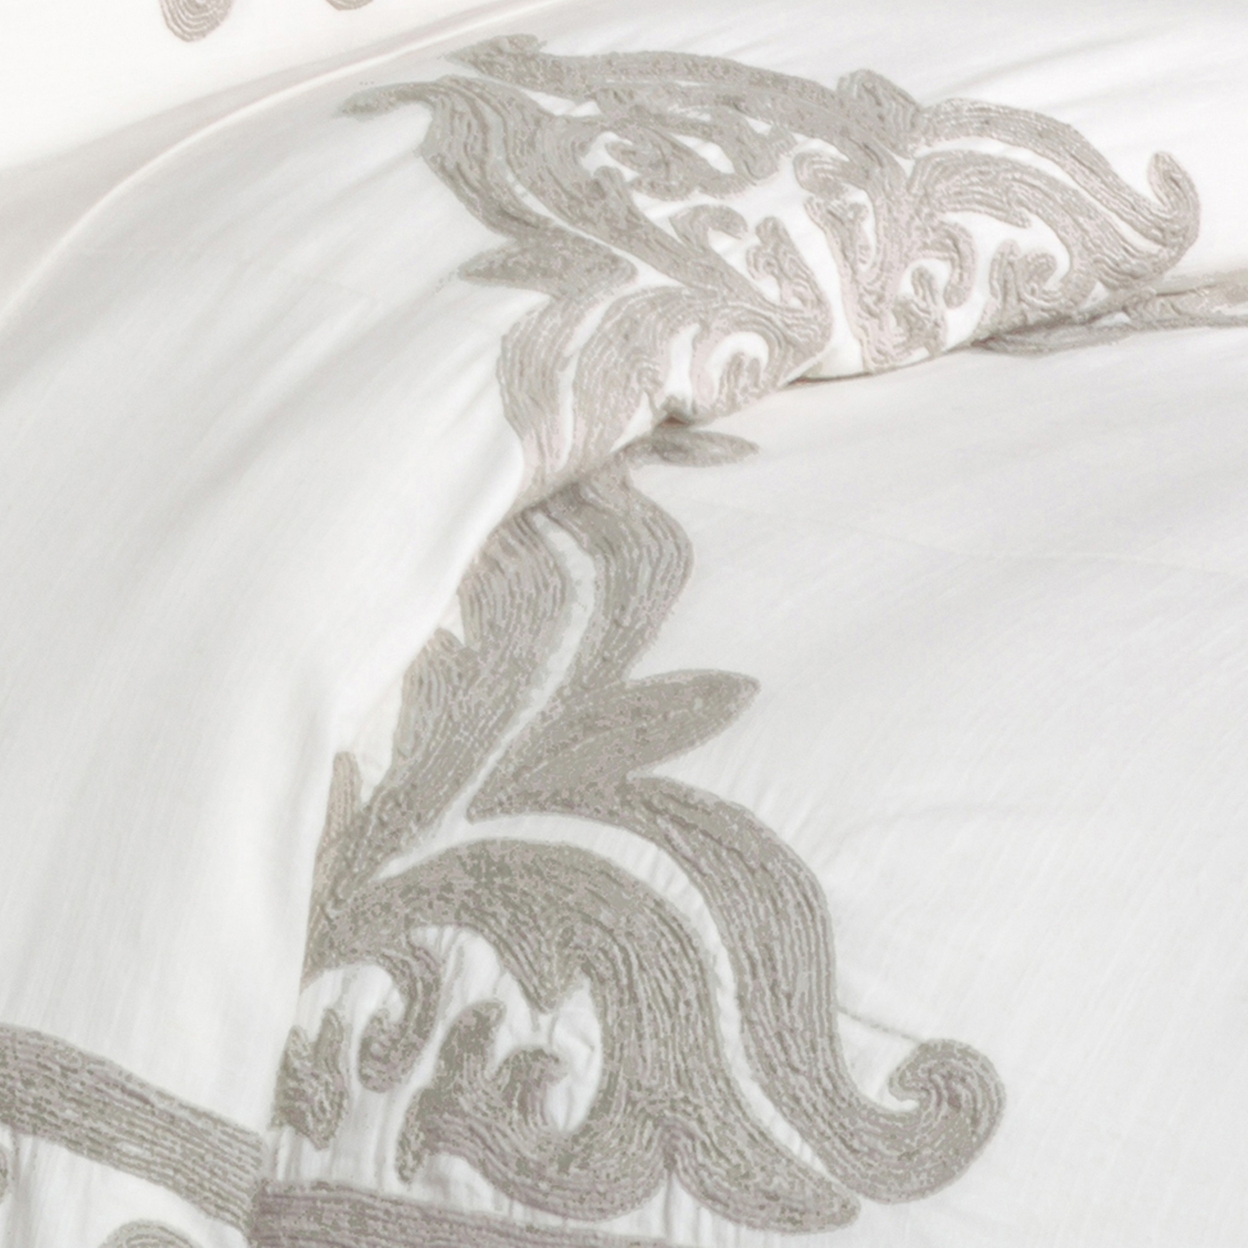 Lenz King Size Cotton Duvet Cover With Hand Stitched Damask Embroidery, Ivory- Saltoro Sherpi